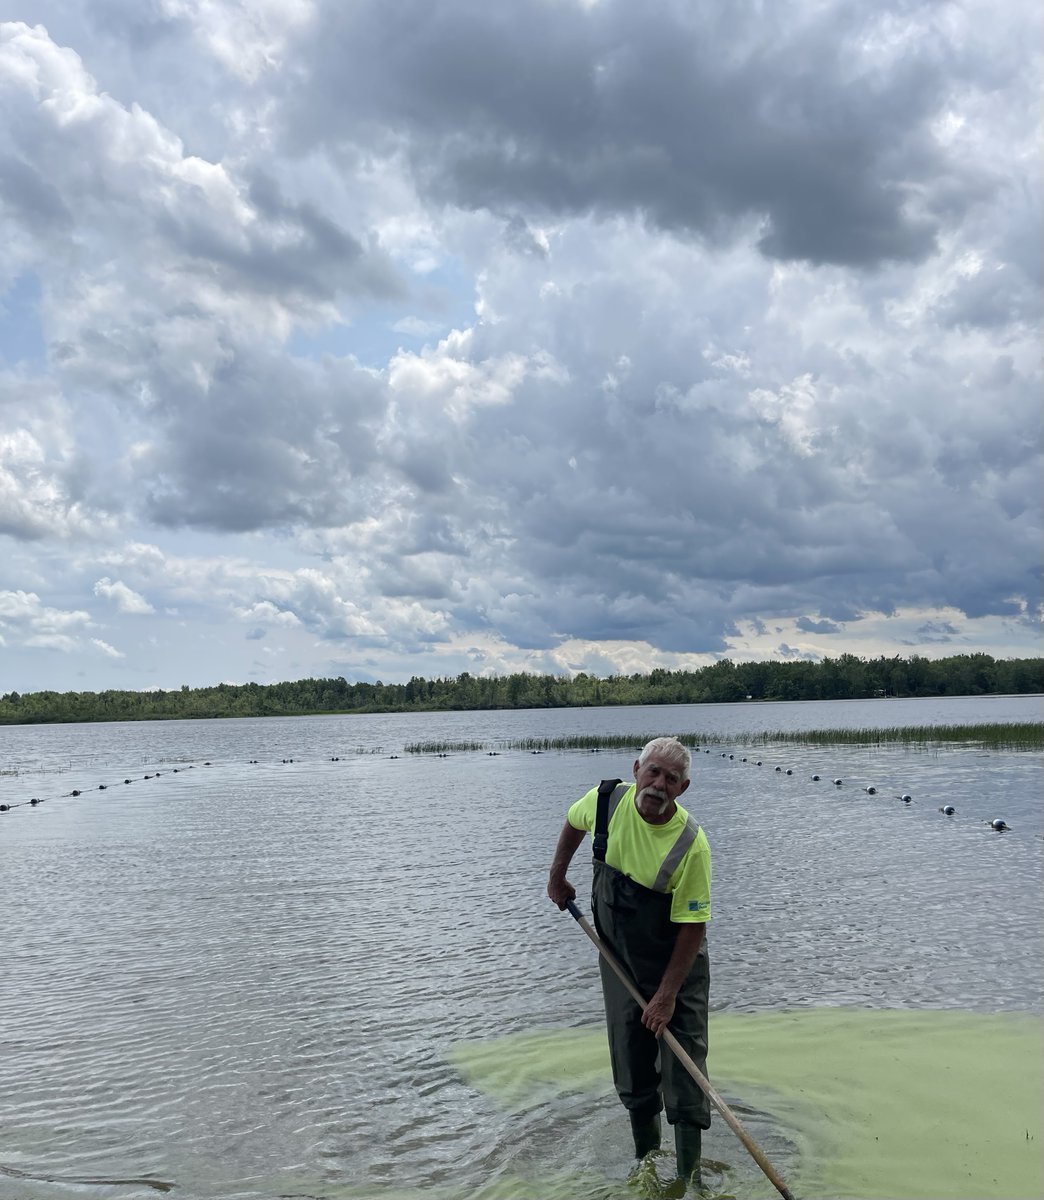 #StaffSunday

Meet Dan, Rideau River's Manual Worker!

Dan has been working at Rideau River for 25 years, his hard work around the park does not go unnoticed! Dan's favourite part of his job is the work he does around the park and the people he meets along the way.